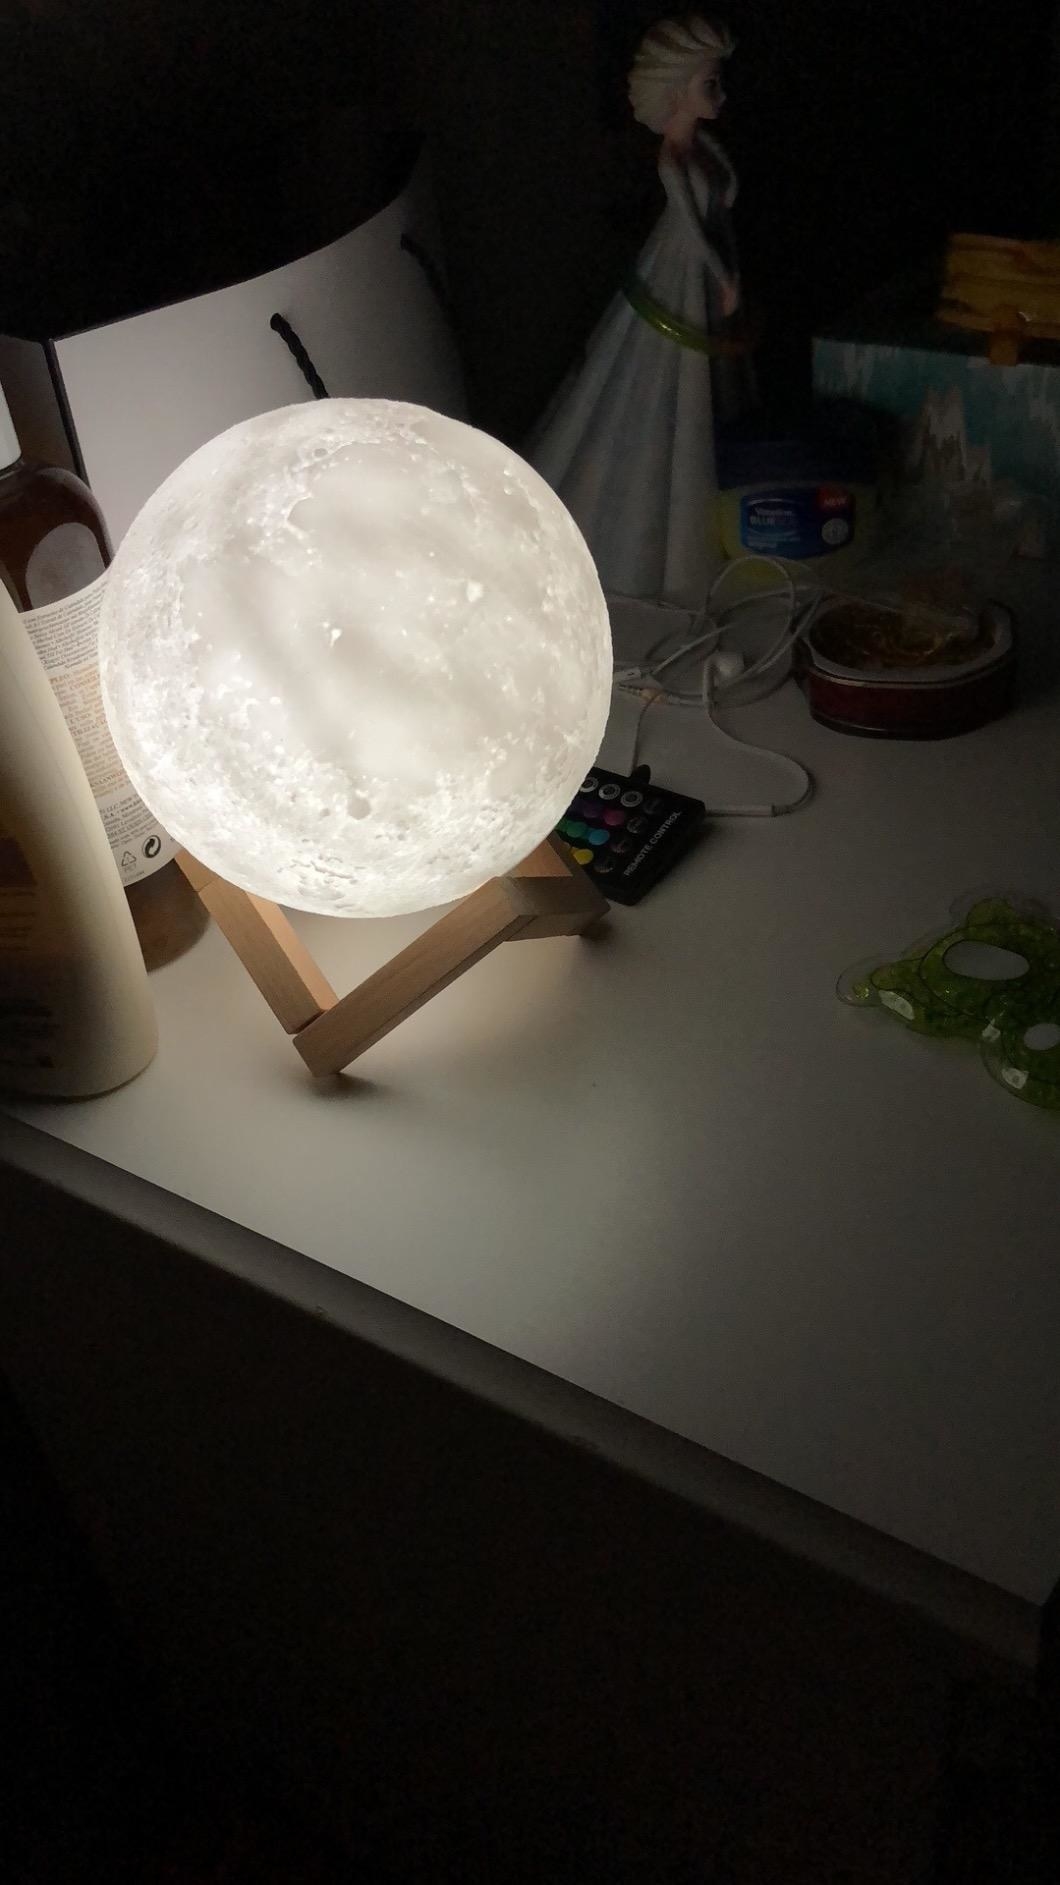 the moon lamp lit up white sitting on its wooden stand